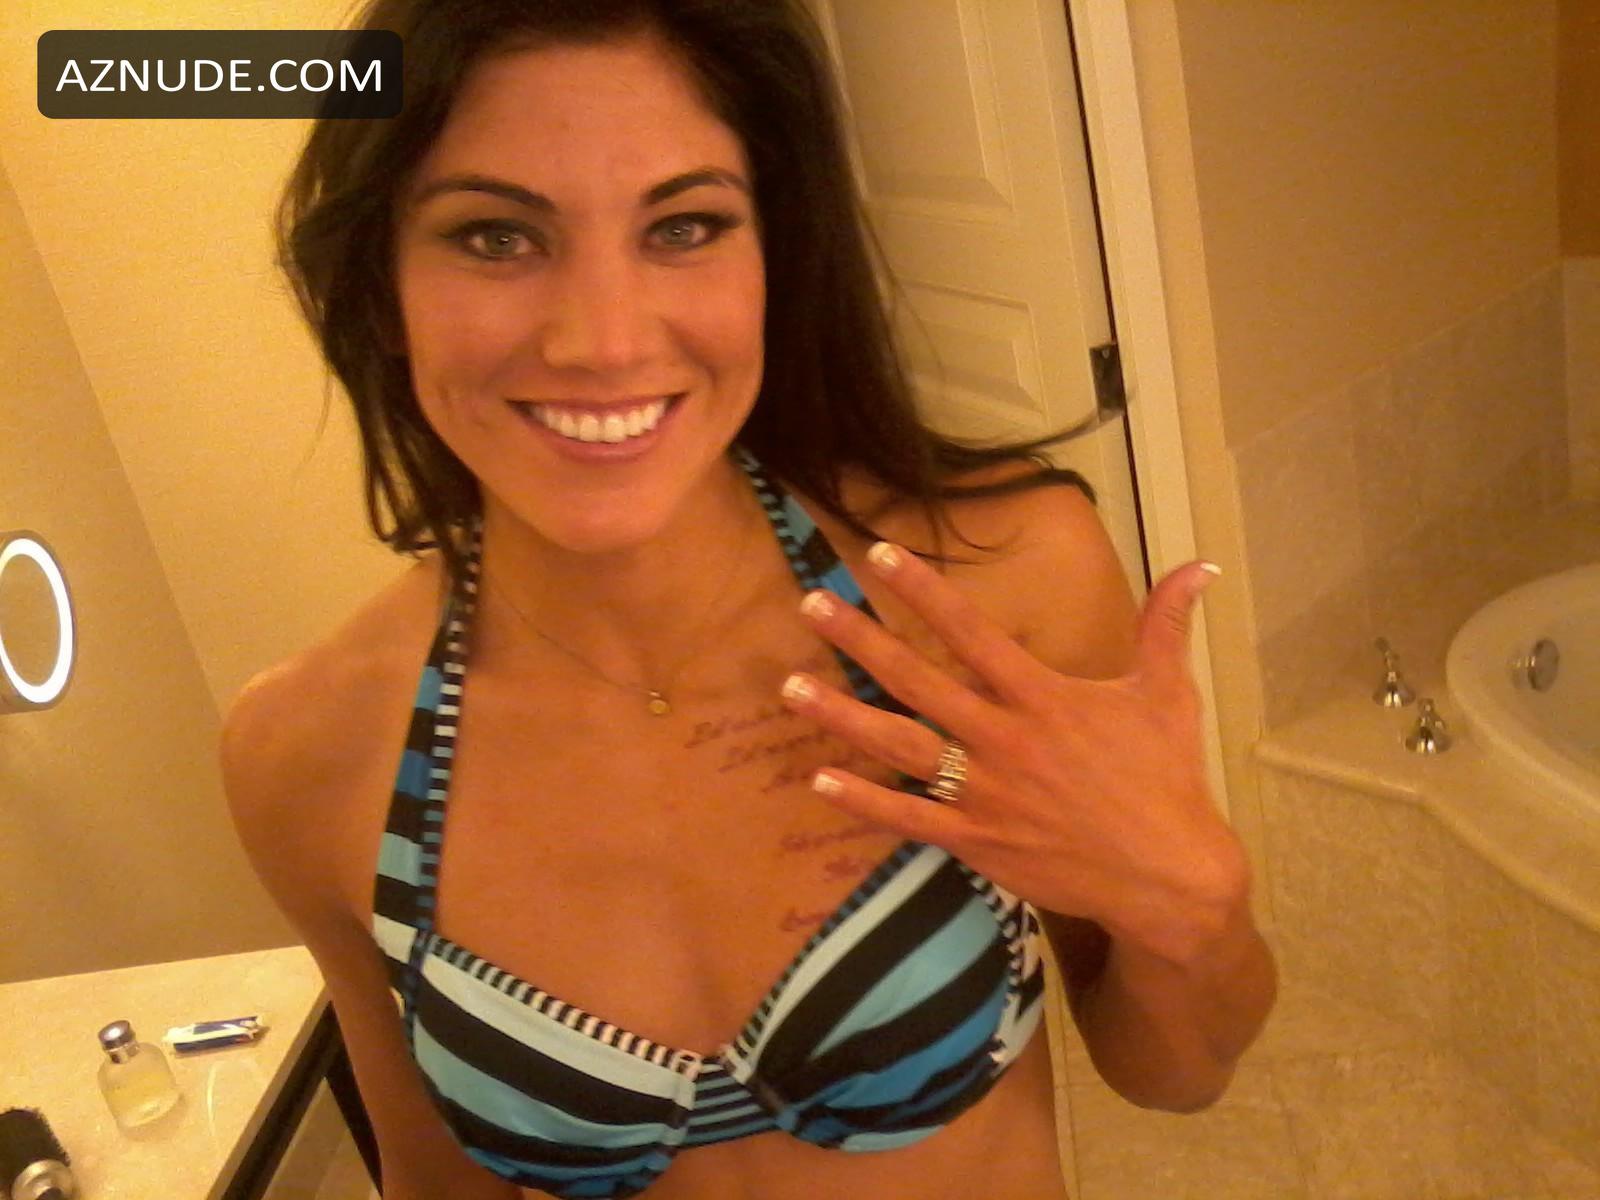 Nude pics of hope solo